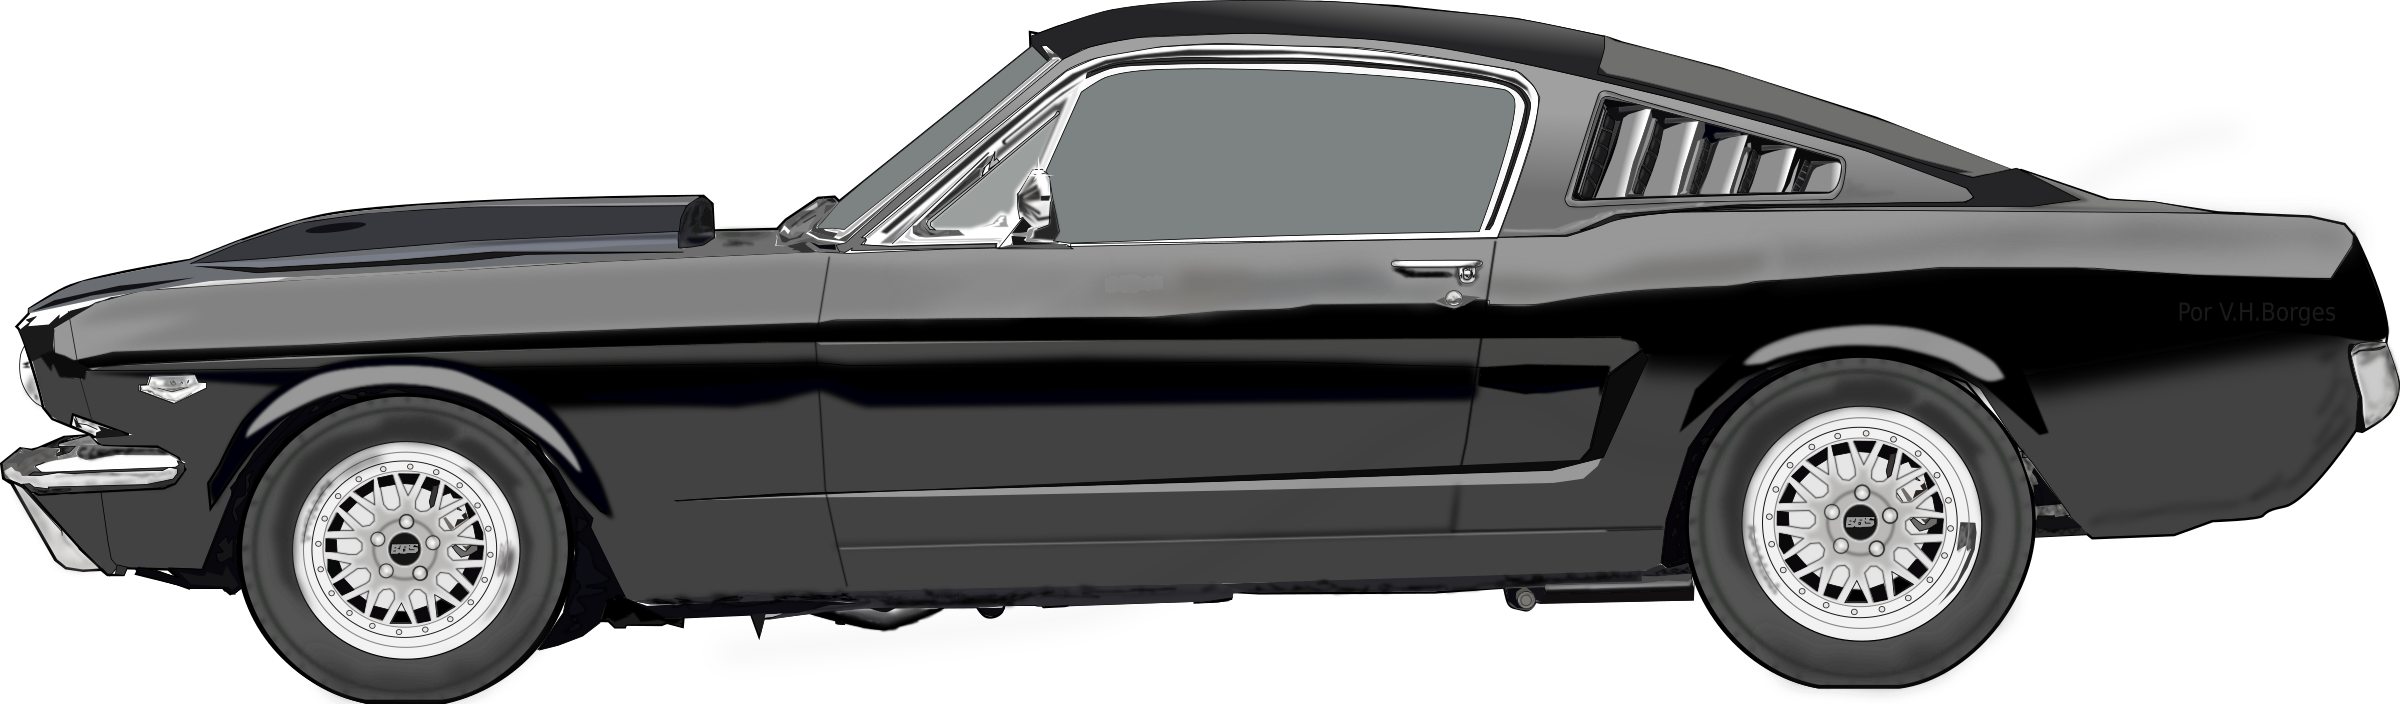 Ford Mustang No Background